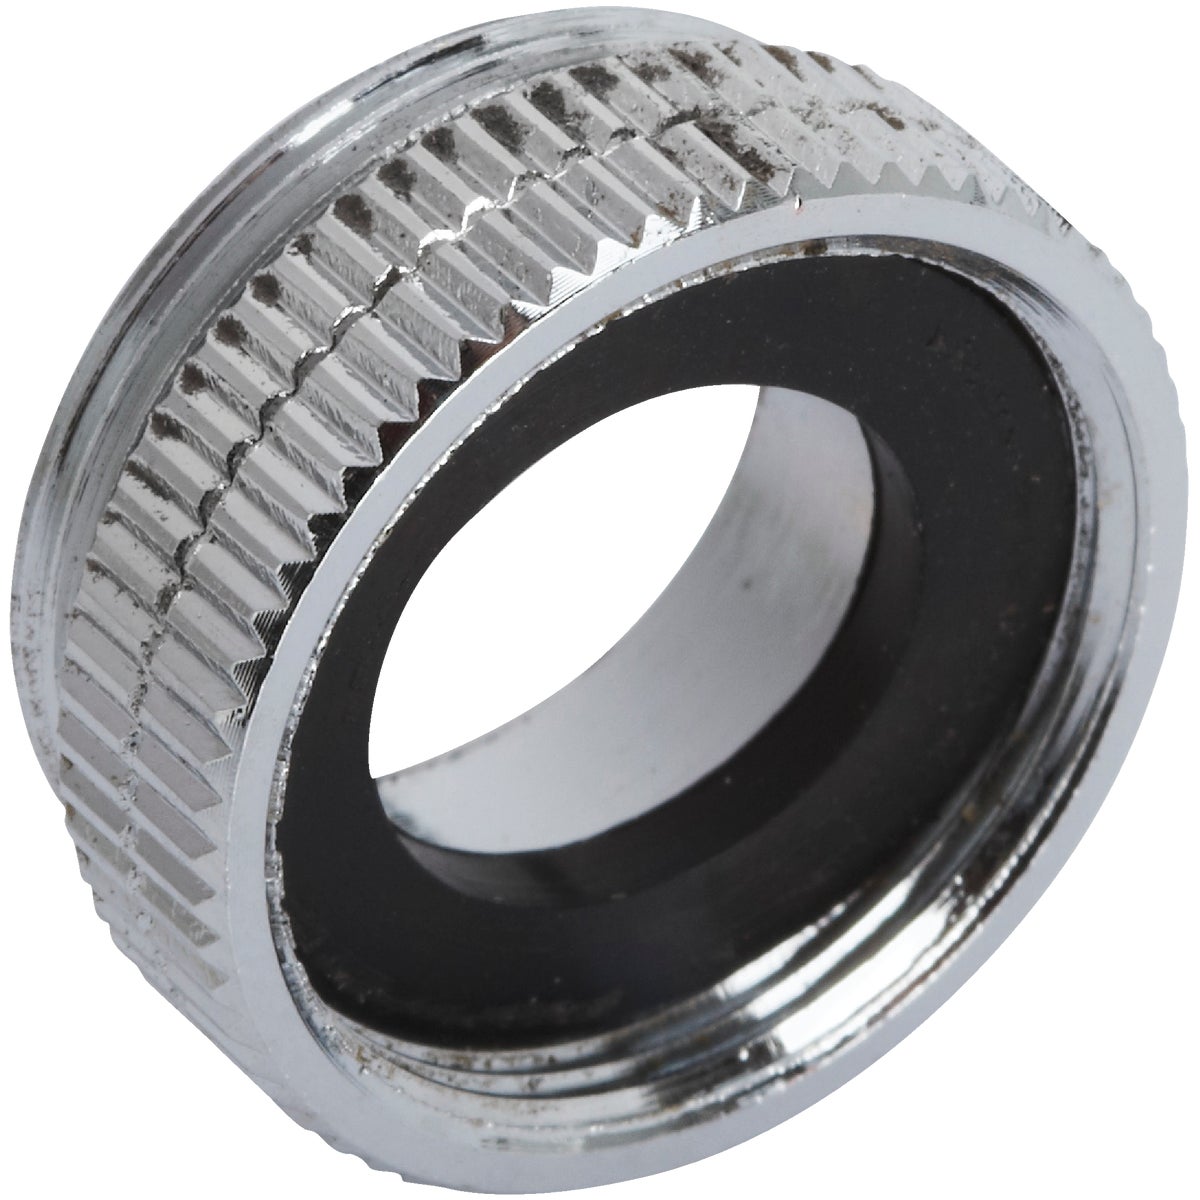 Item 400732, Chrome-plated low lead aerator adapter.